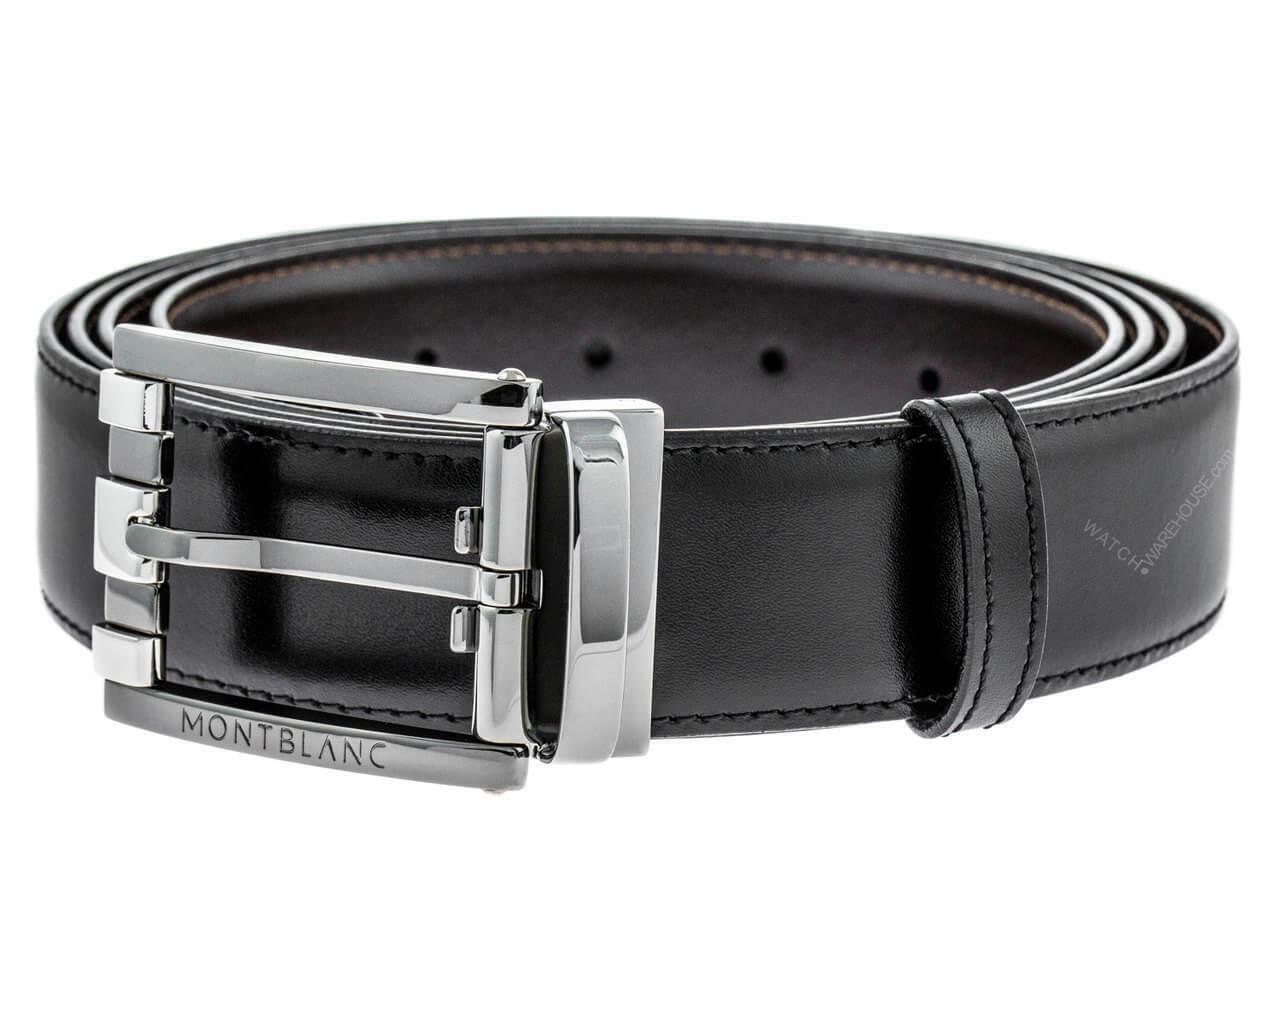 MONTBLANC Rectangular Buckle Black/Brown Leather 103445 Fast Free US Shipping | Watch Warehouse